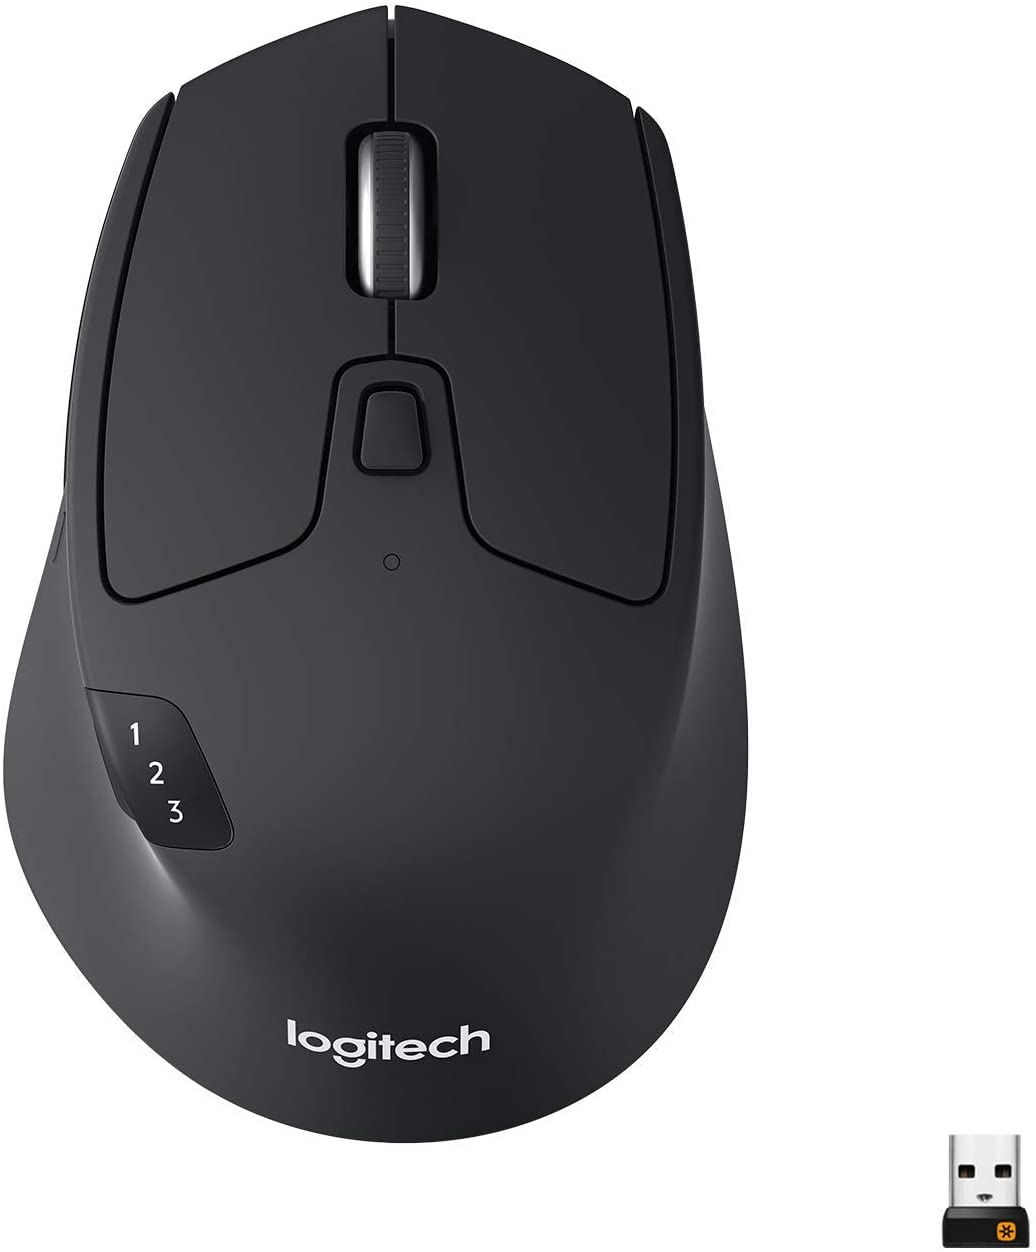 Logitech M720 Triathalon Multi-Device Wireless Mouse – Easily Move Text Images and Files Between 3 Windows and Apple Mac Computers Paired with Bluetooth or USB Hyper-Fast Scrolling Black